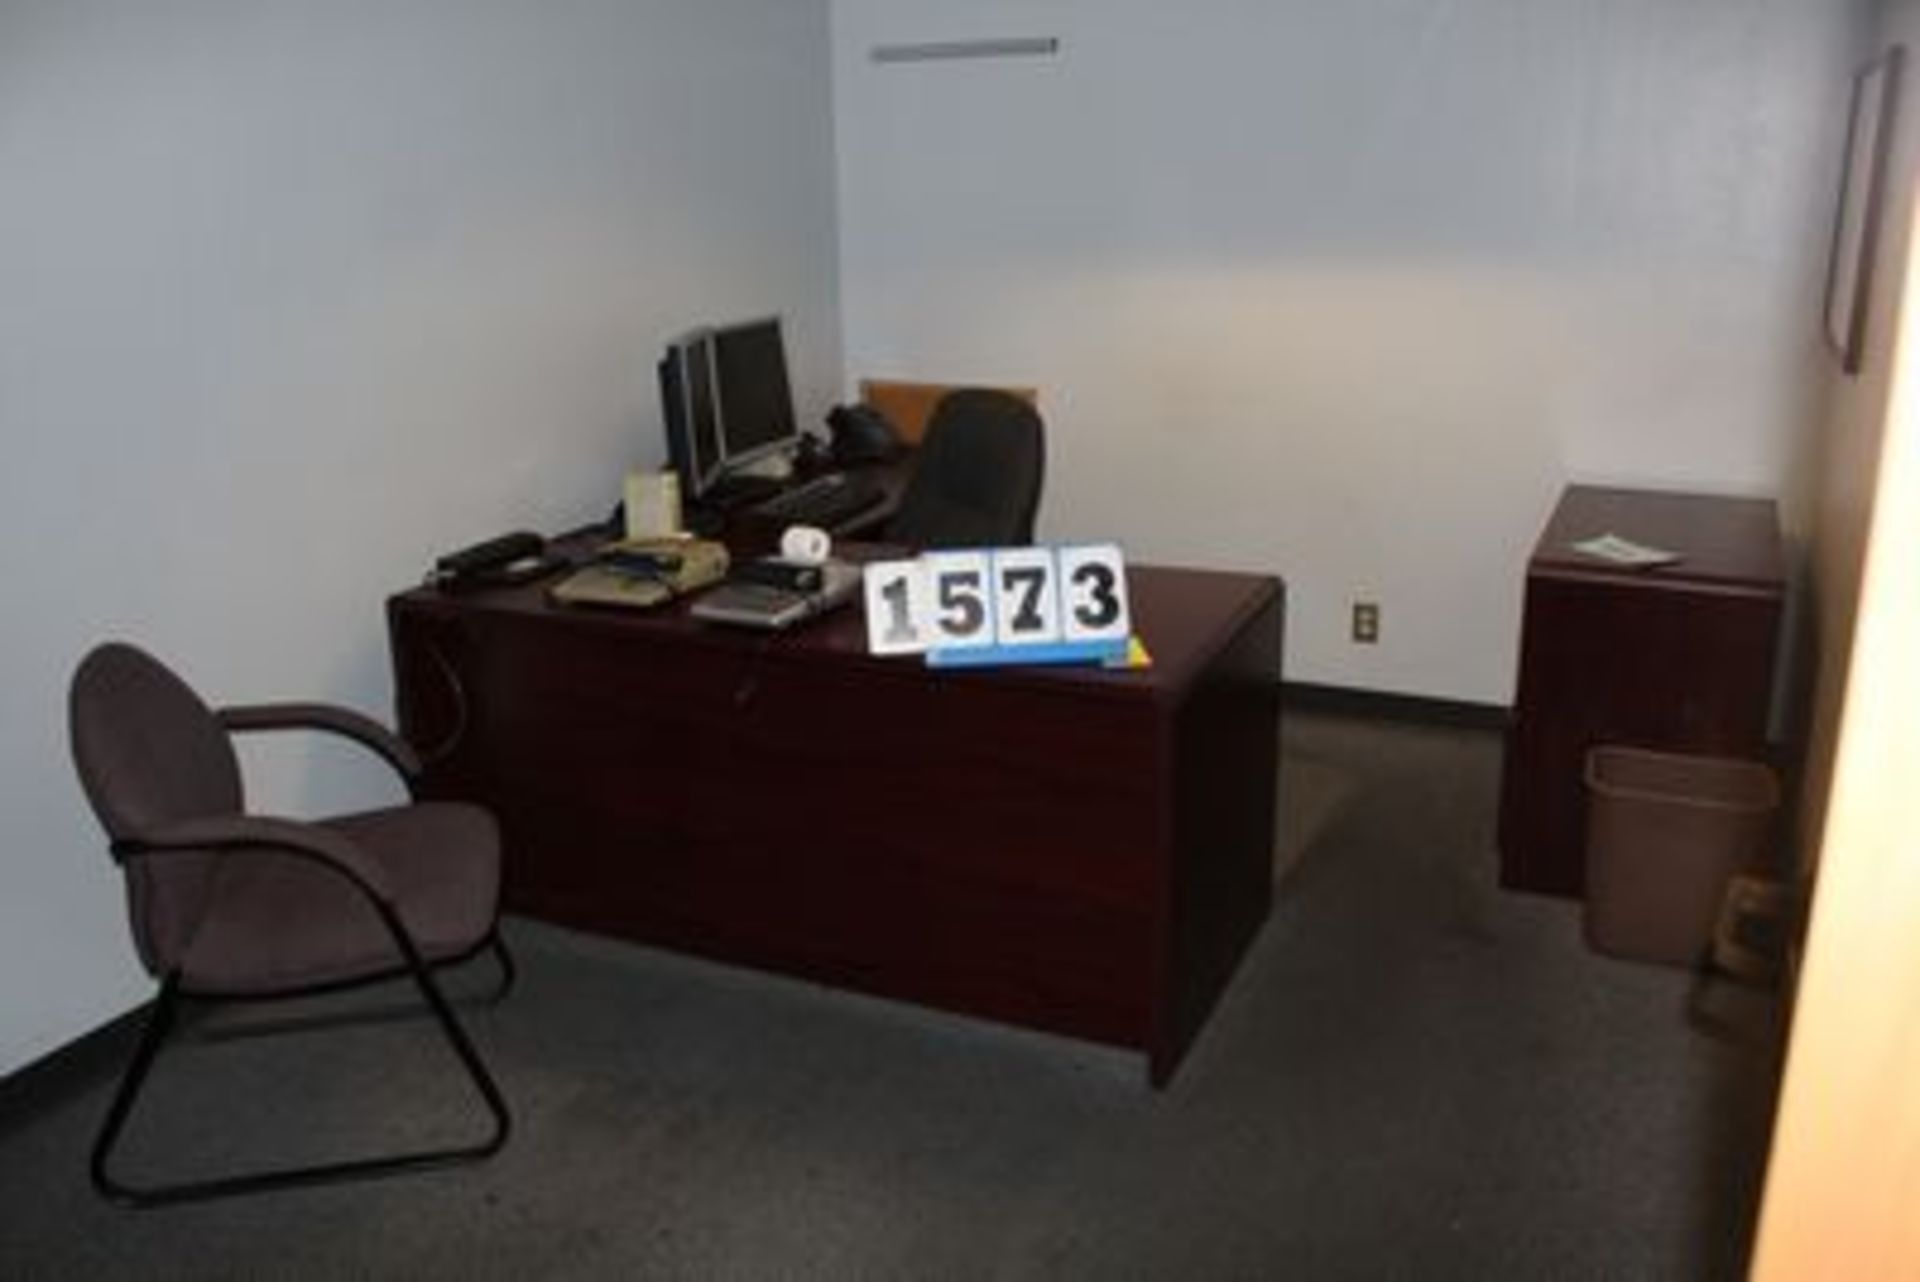 CONT OF OFFICE - Image 2 of 2